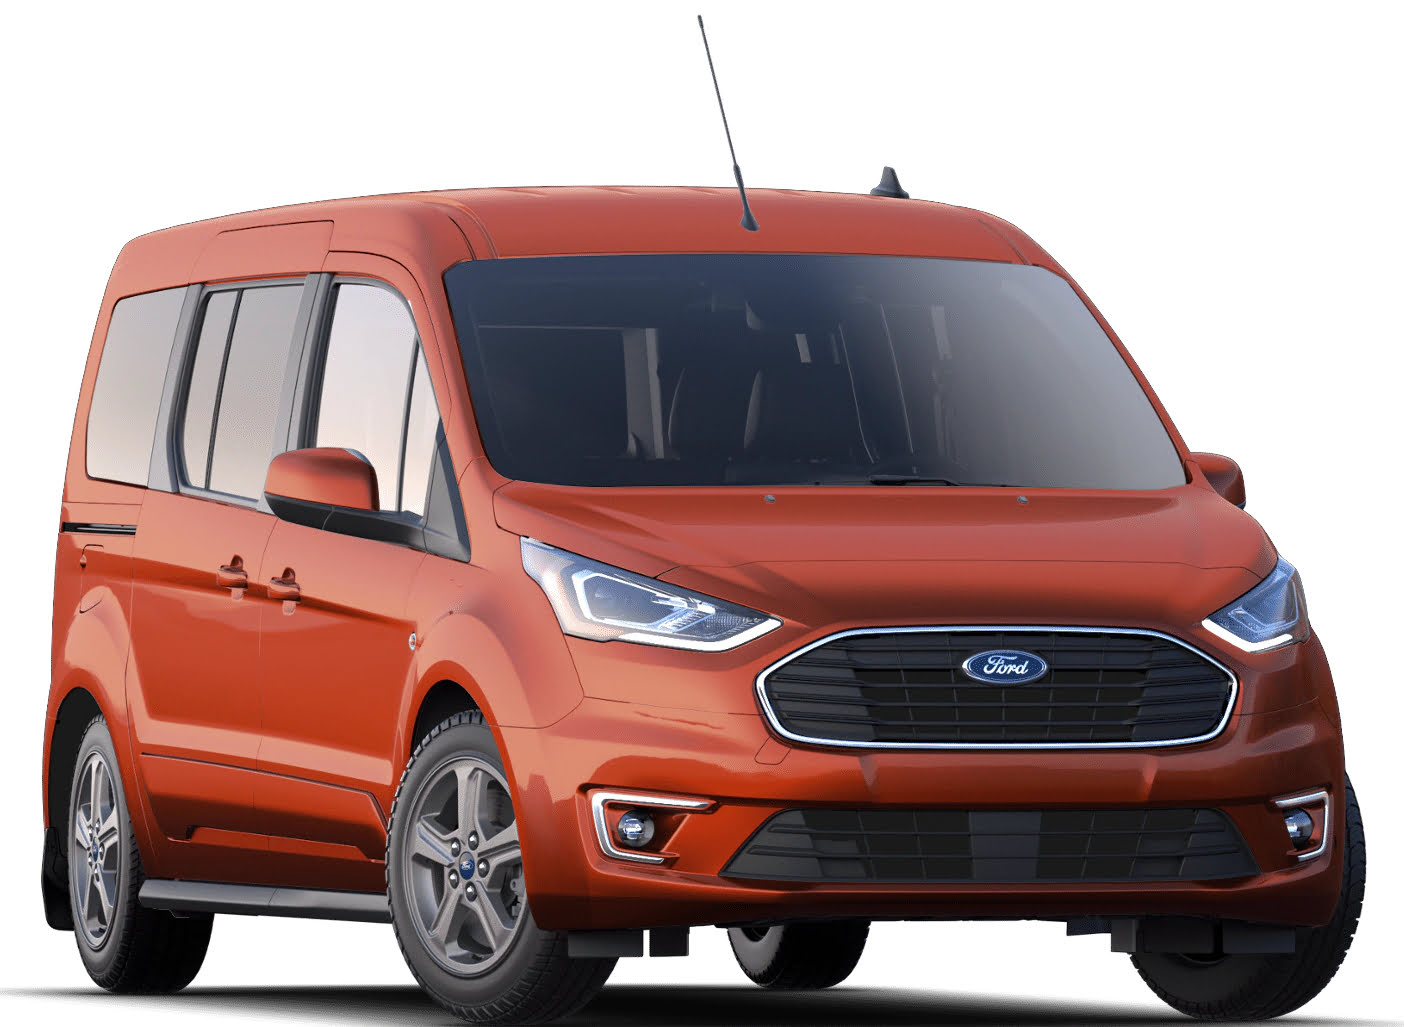 2021 Ford Transit Connect Gains New Sedona Orange Color: First Look